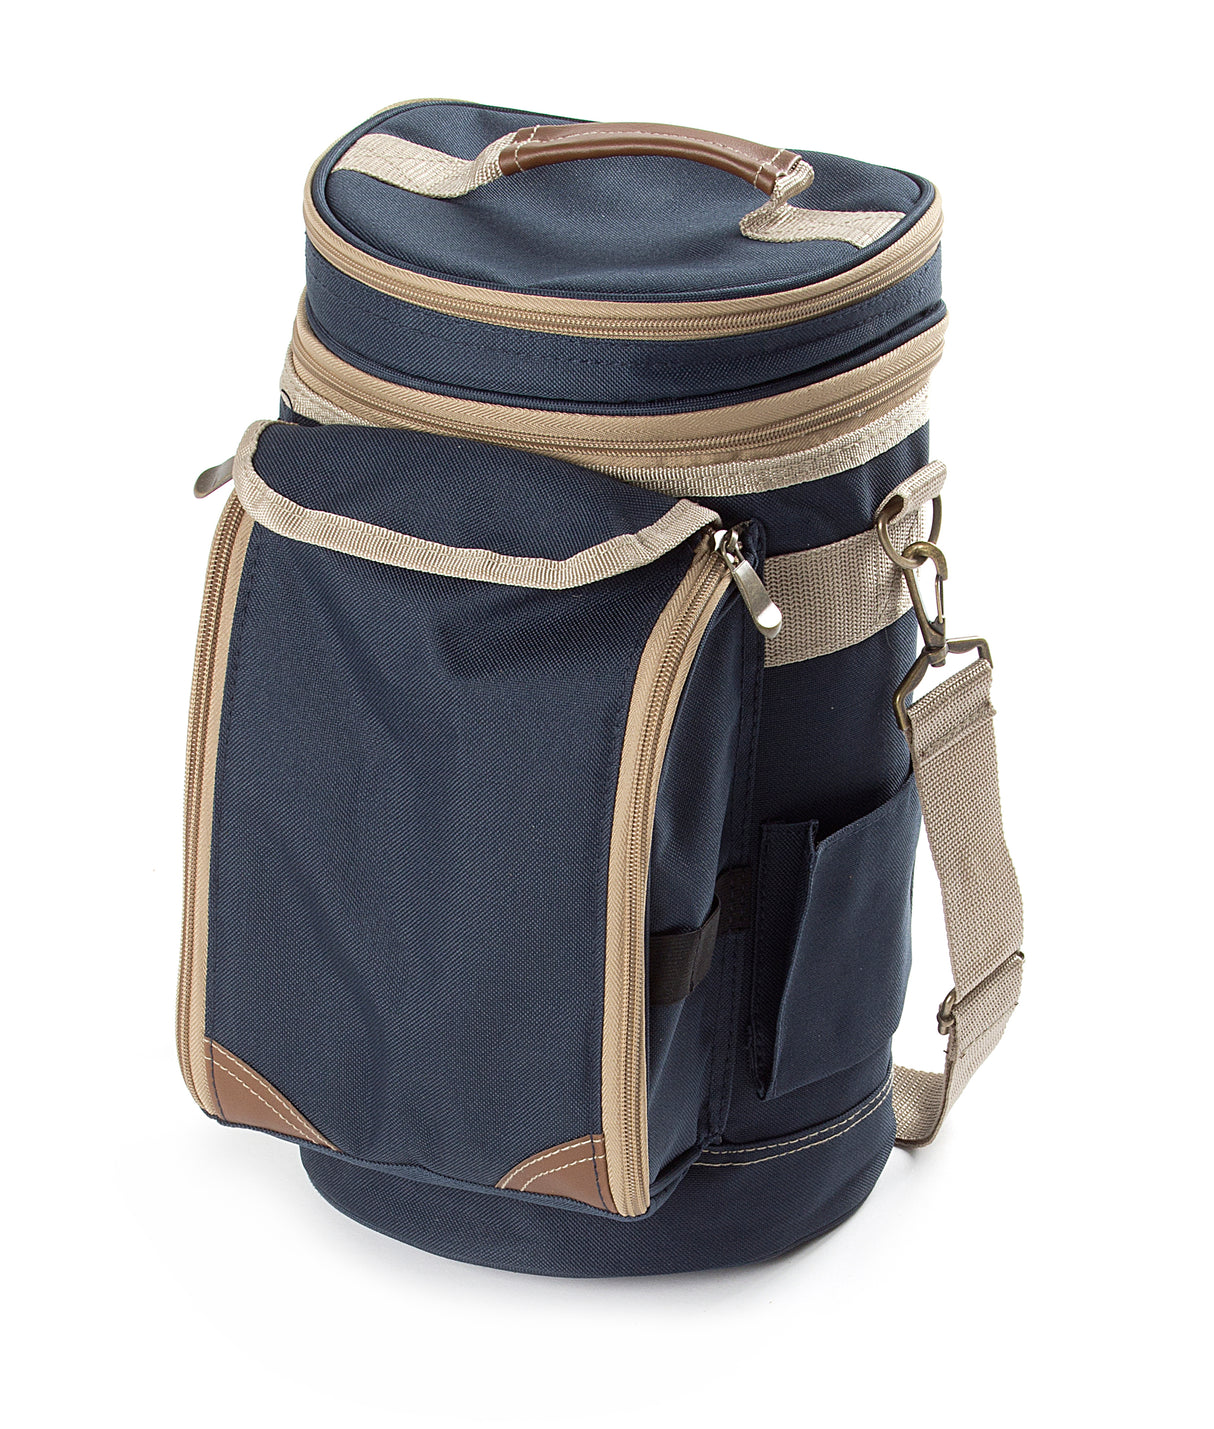 Greenfield Collection Contour Admiral Blue Wine Cooler Bag for Two People - The Greenfield Collection